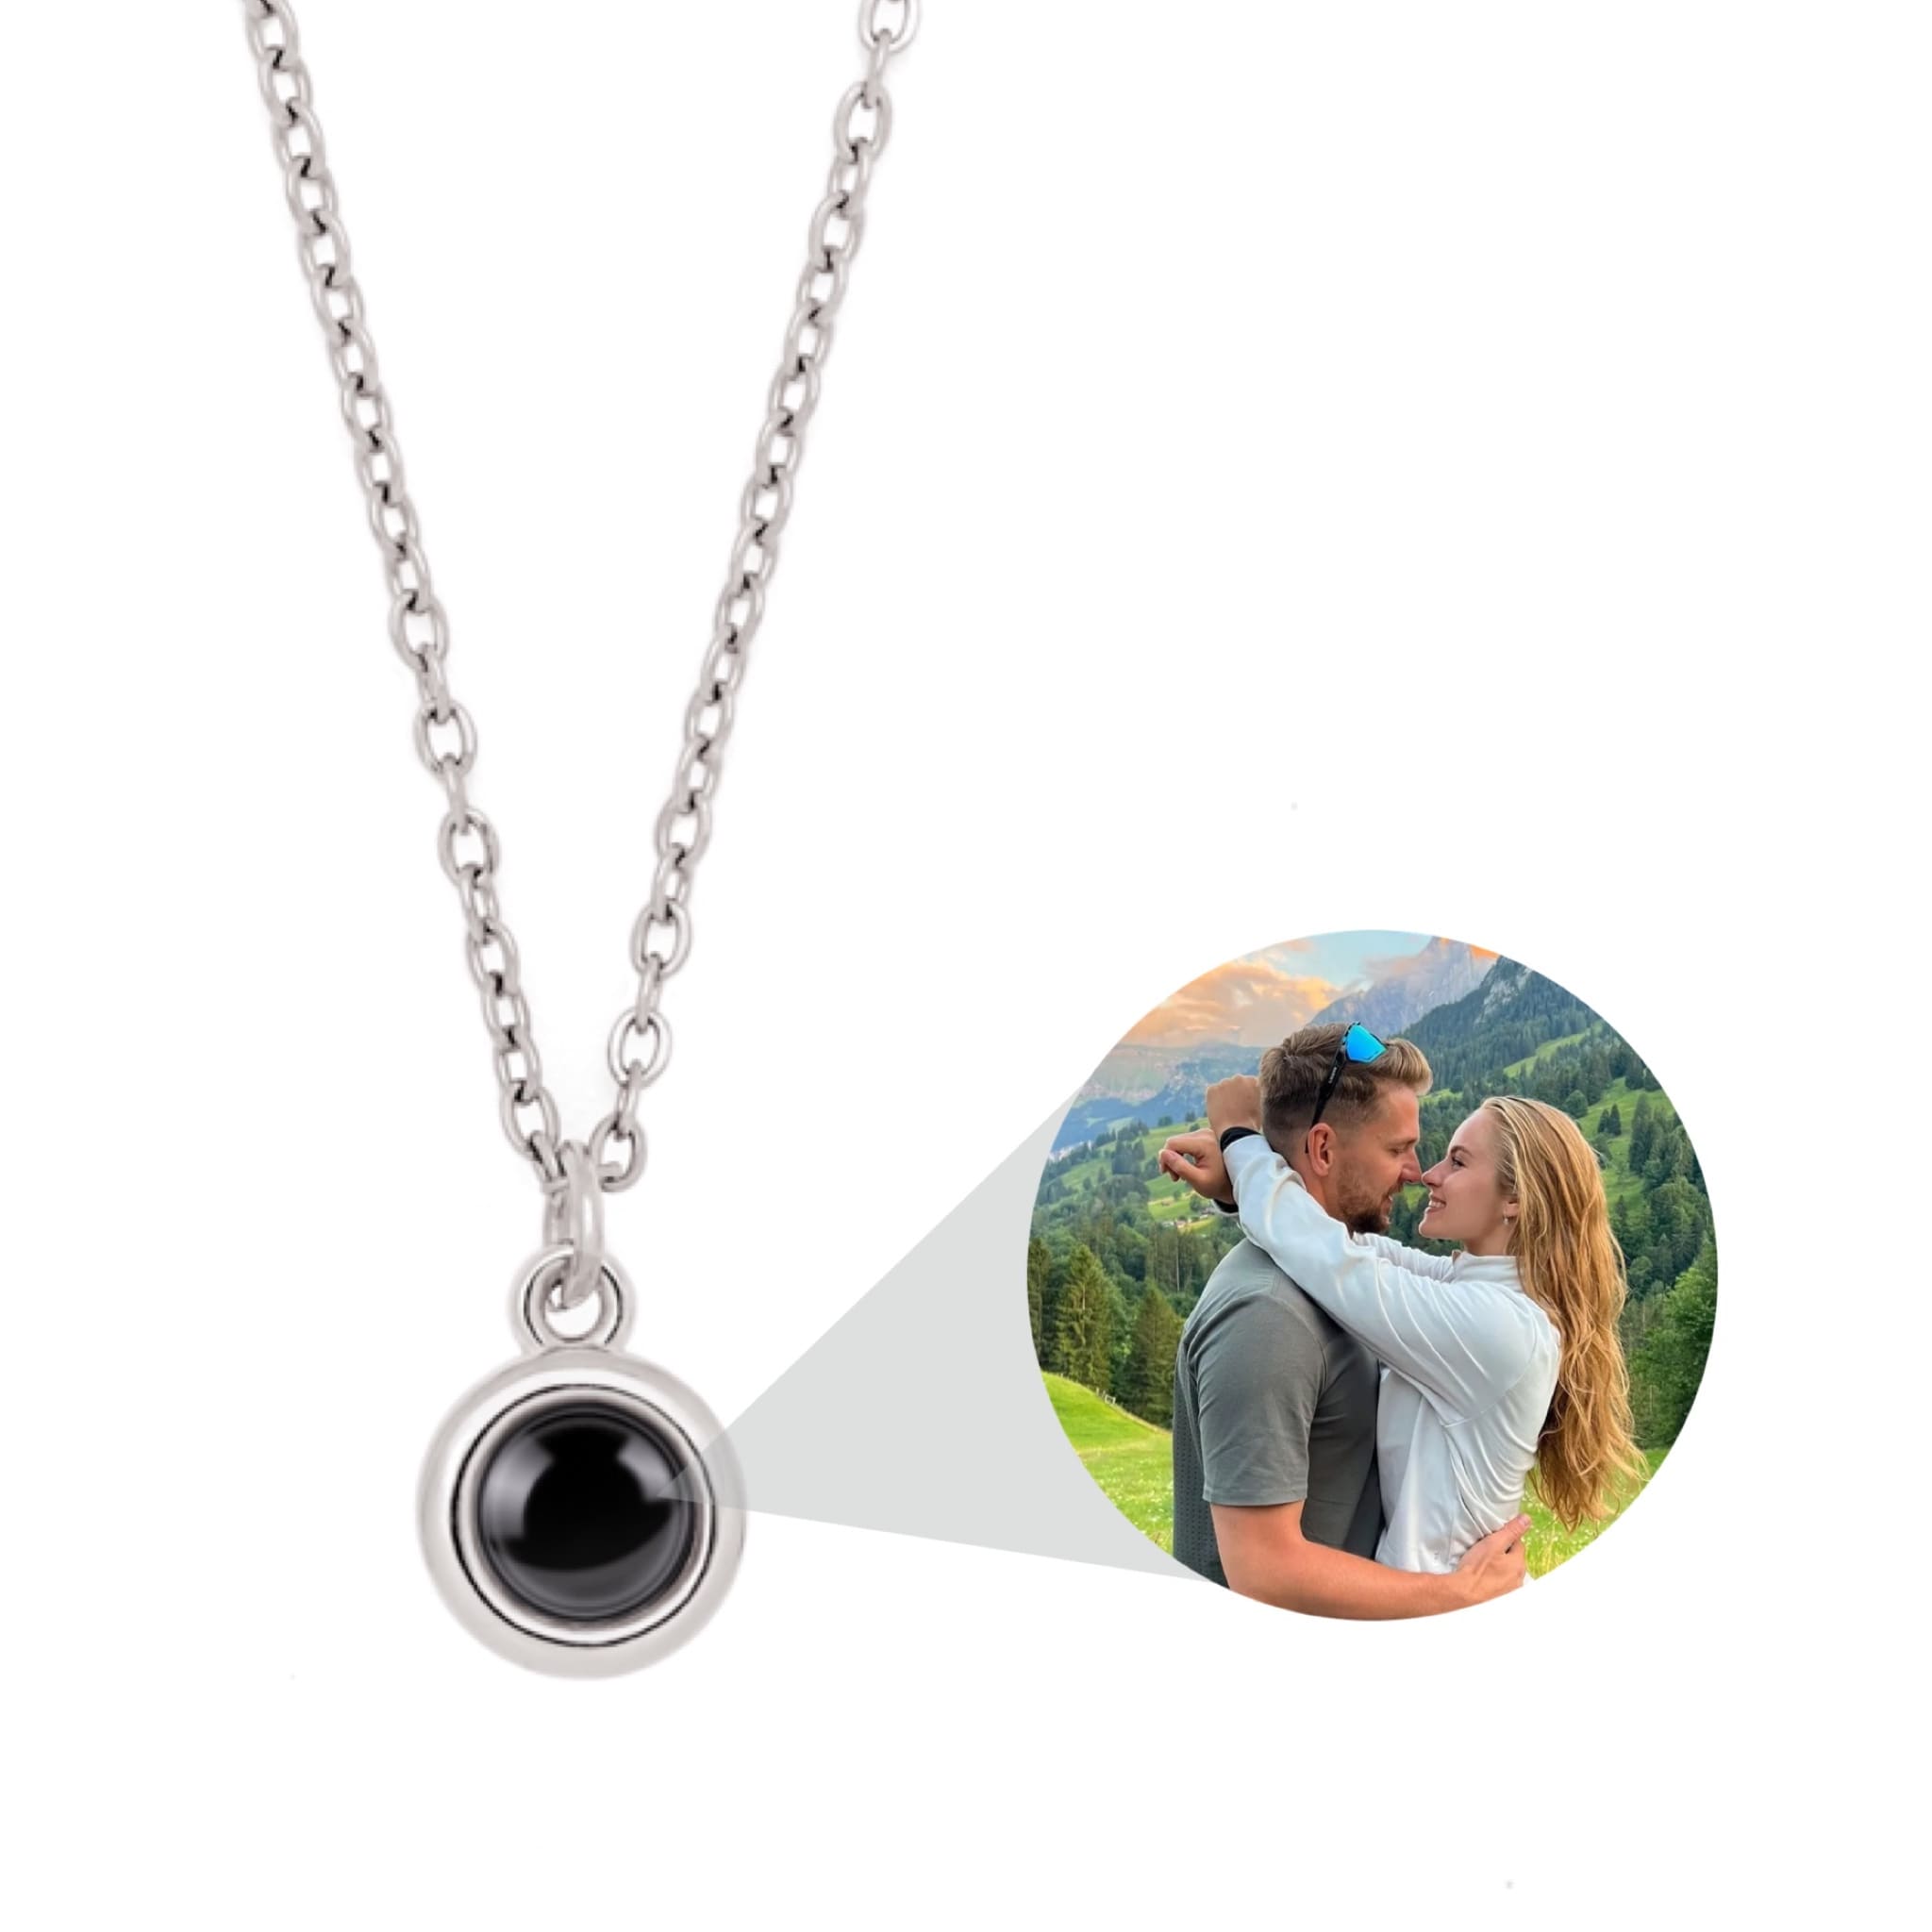 Necklace with Picture Inside - Projection Necklace